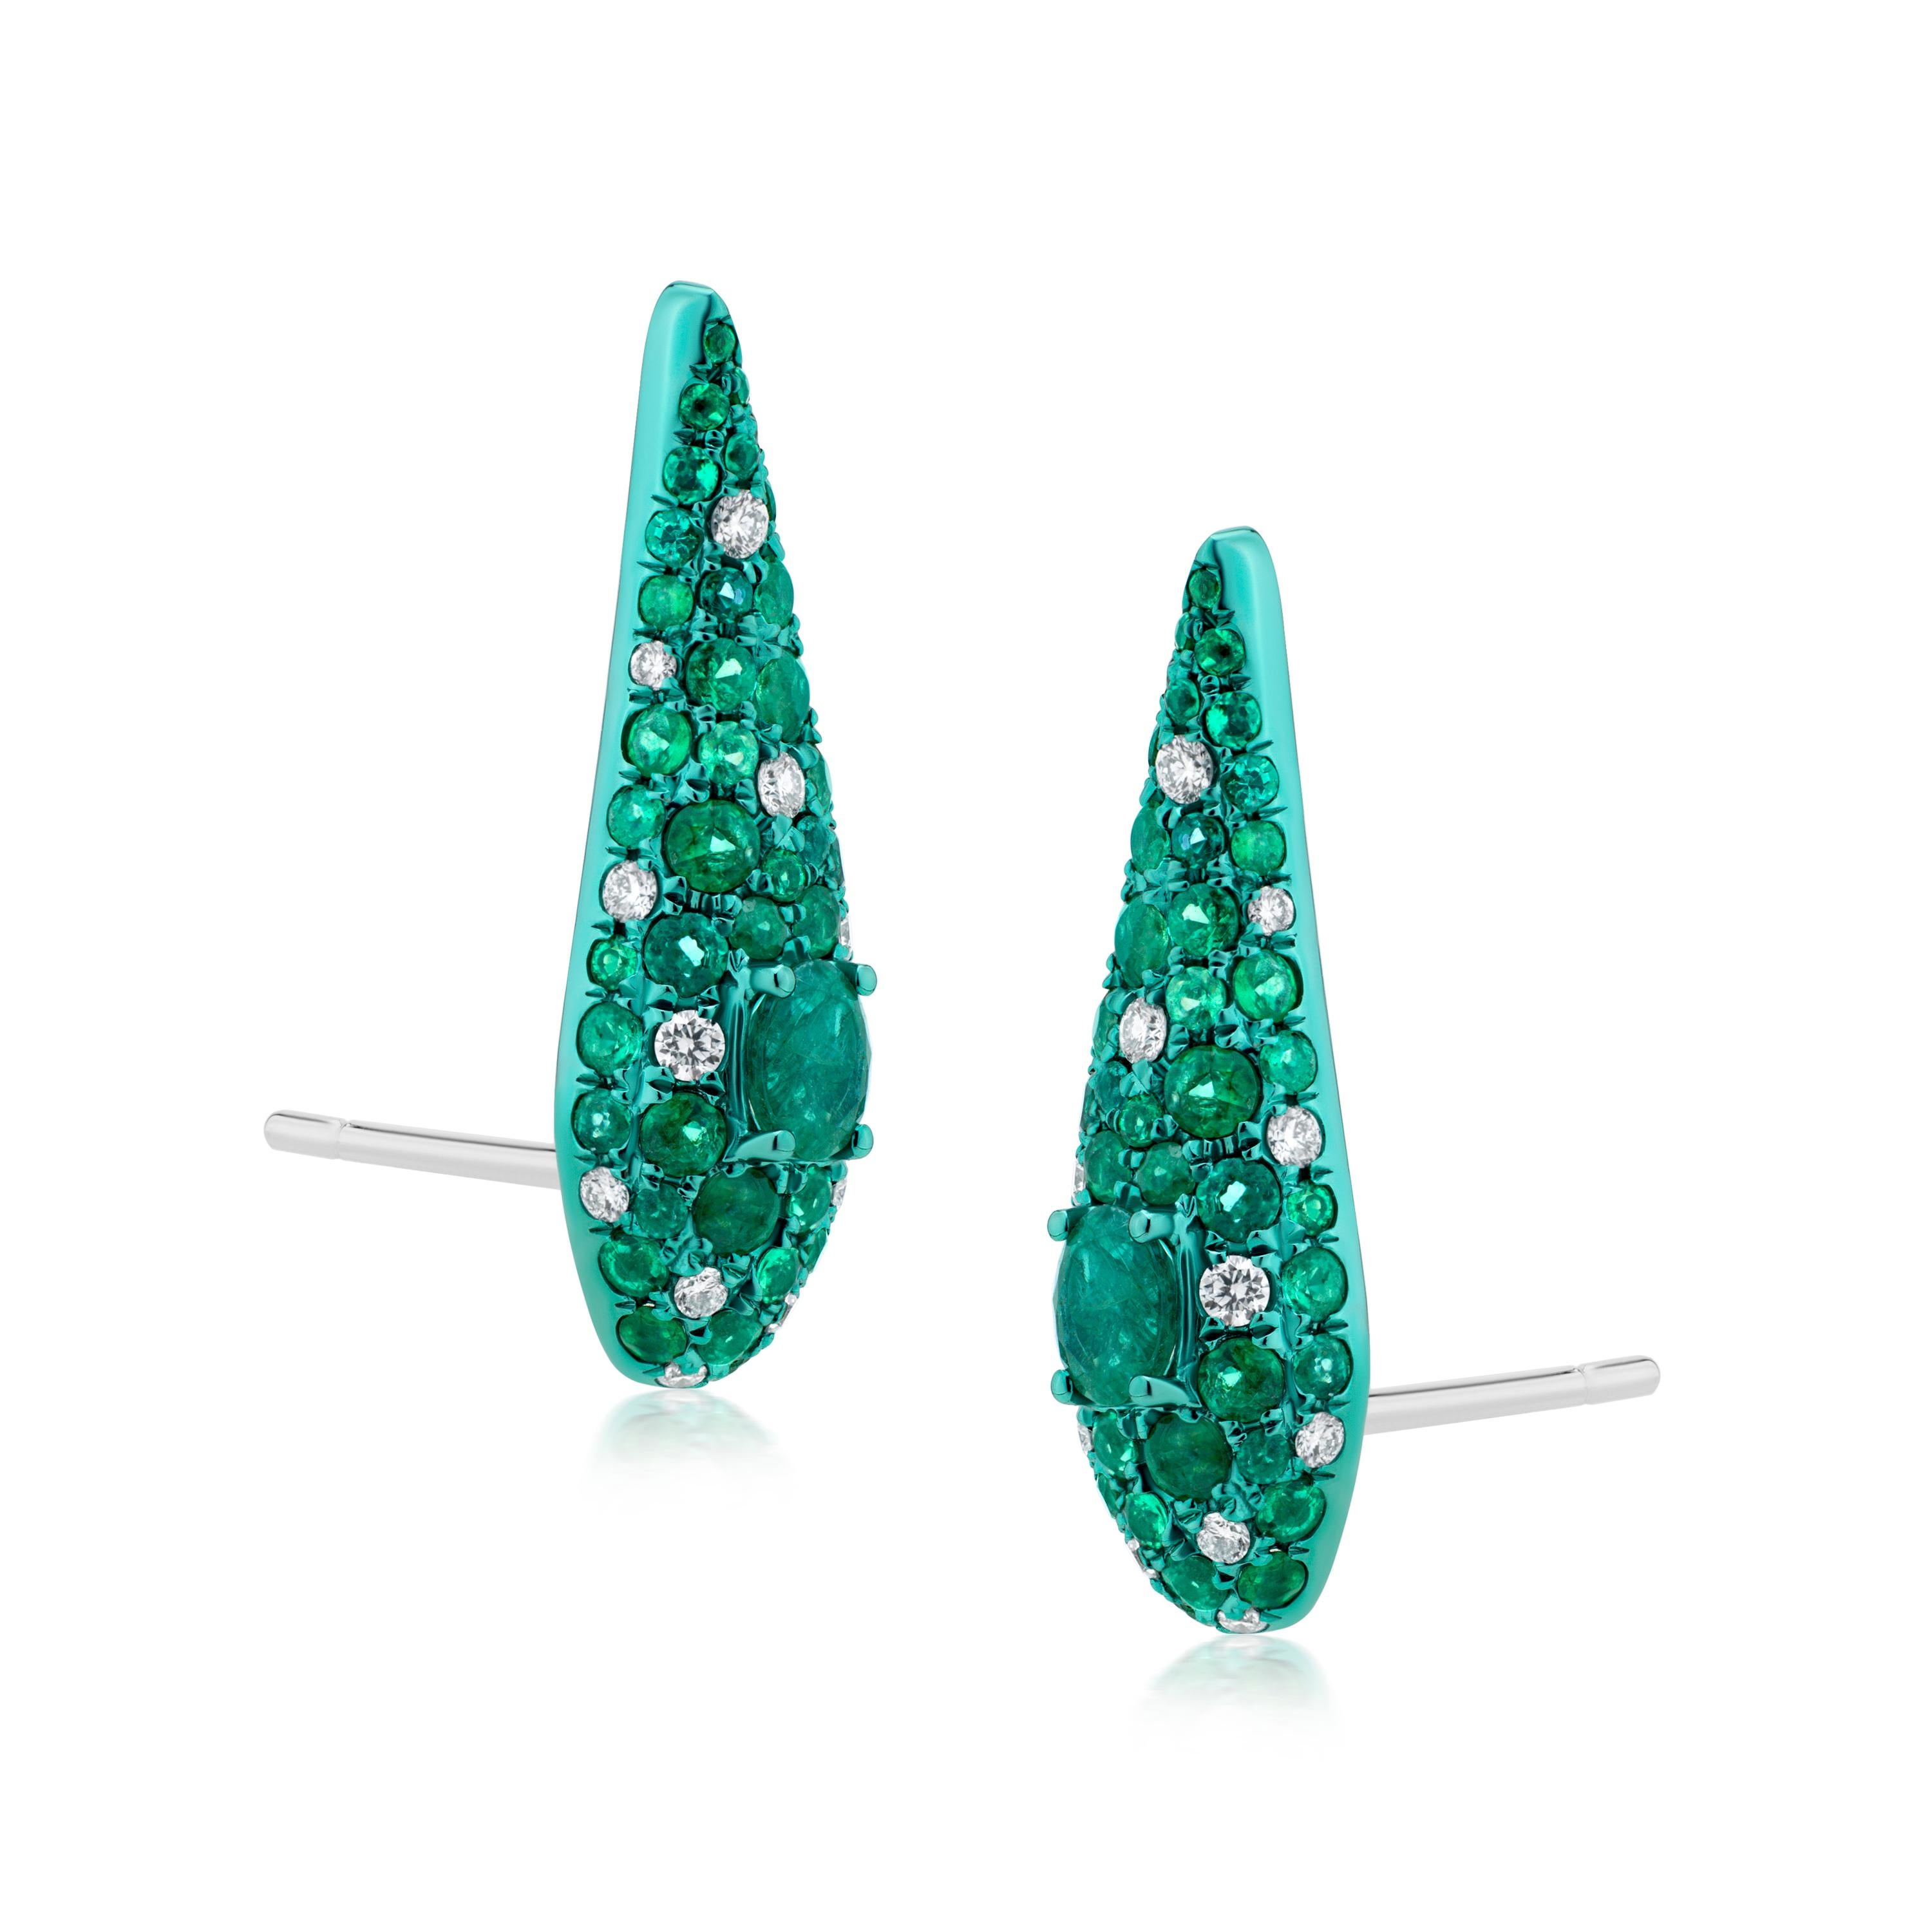 Elevate your elegance with the enchanting Gemistry 1.69Cttw. Emerald and Diamond Serpentine Ear Climber in 18k Gold and Green Rhodium. This exquisite piece captures the mystique of a serpent, delicately winding its way up your earlobe. 

The focal